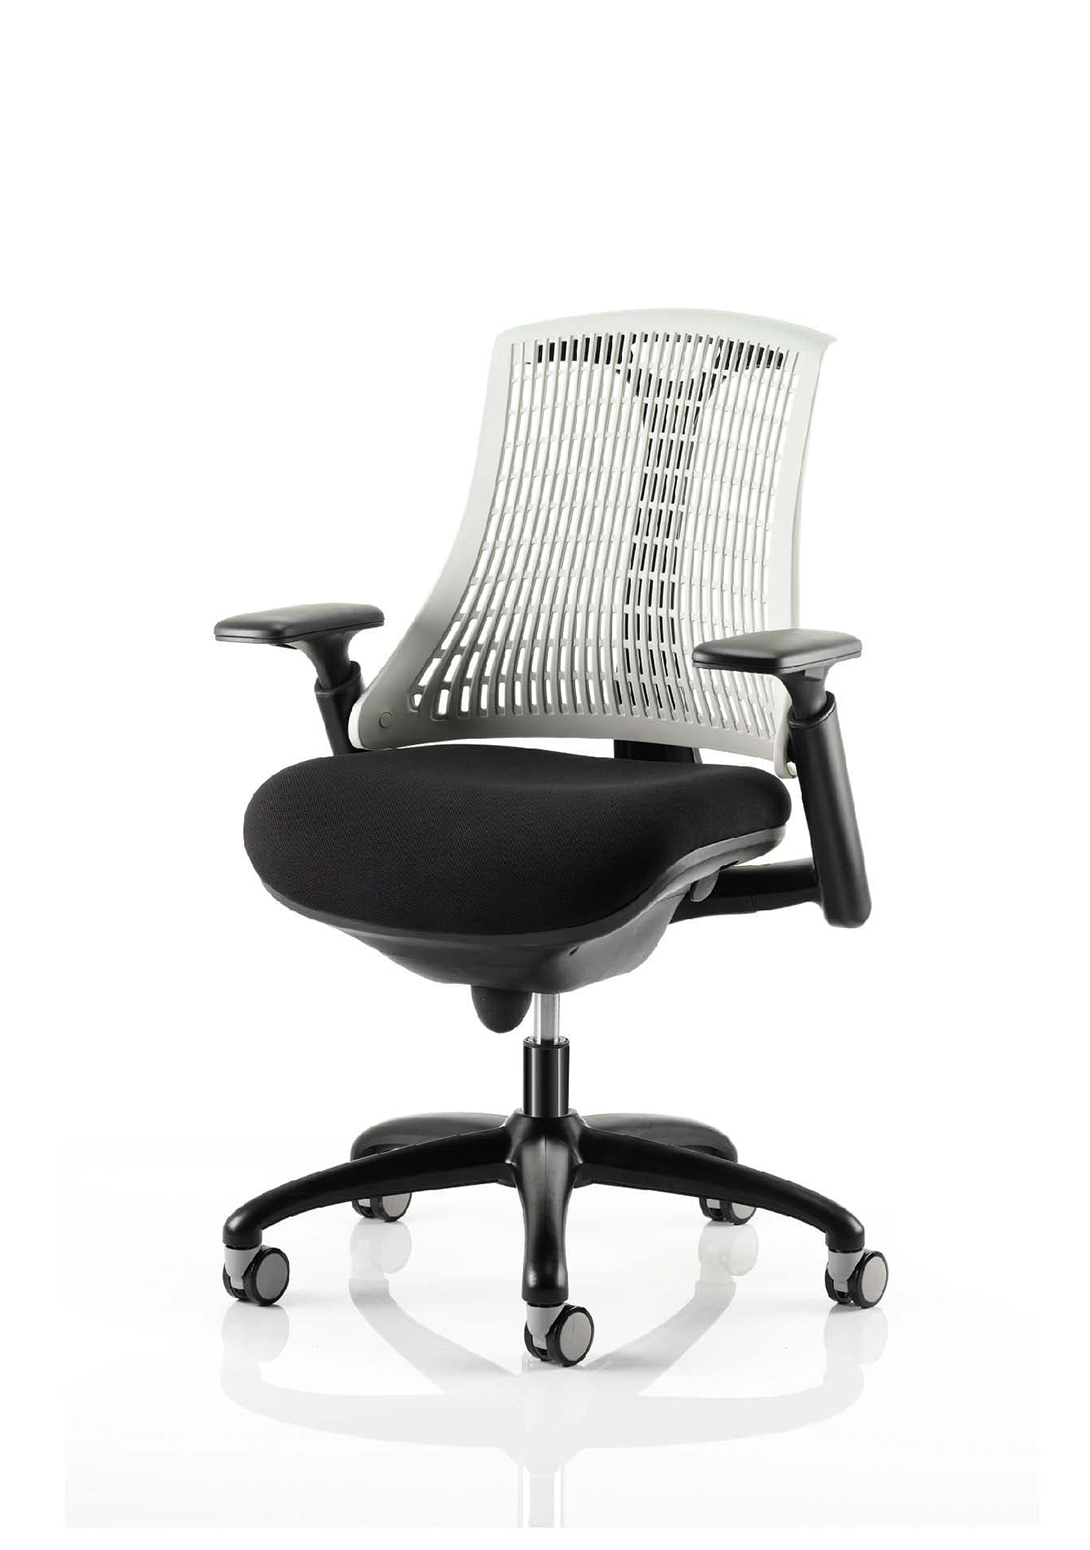 Flex Task Operator Chair Black Frame With Black Fabric Seat Red Back With Arms